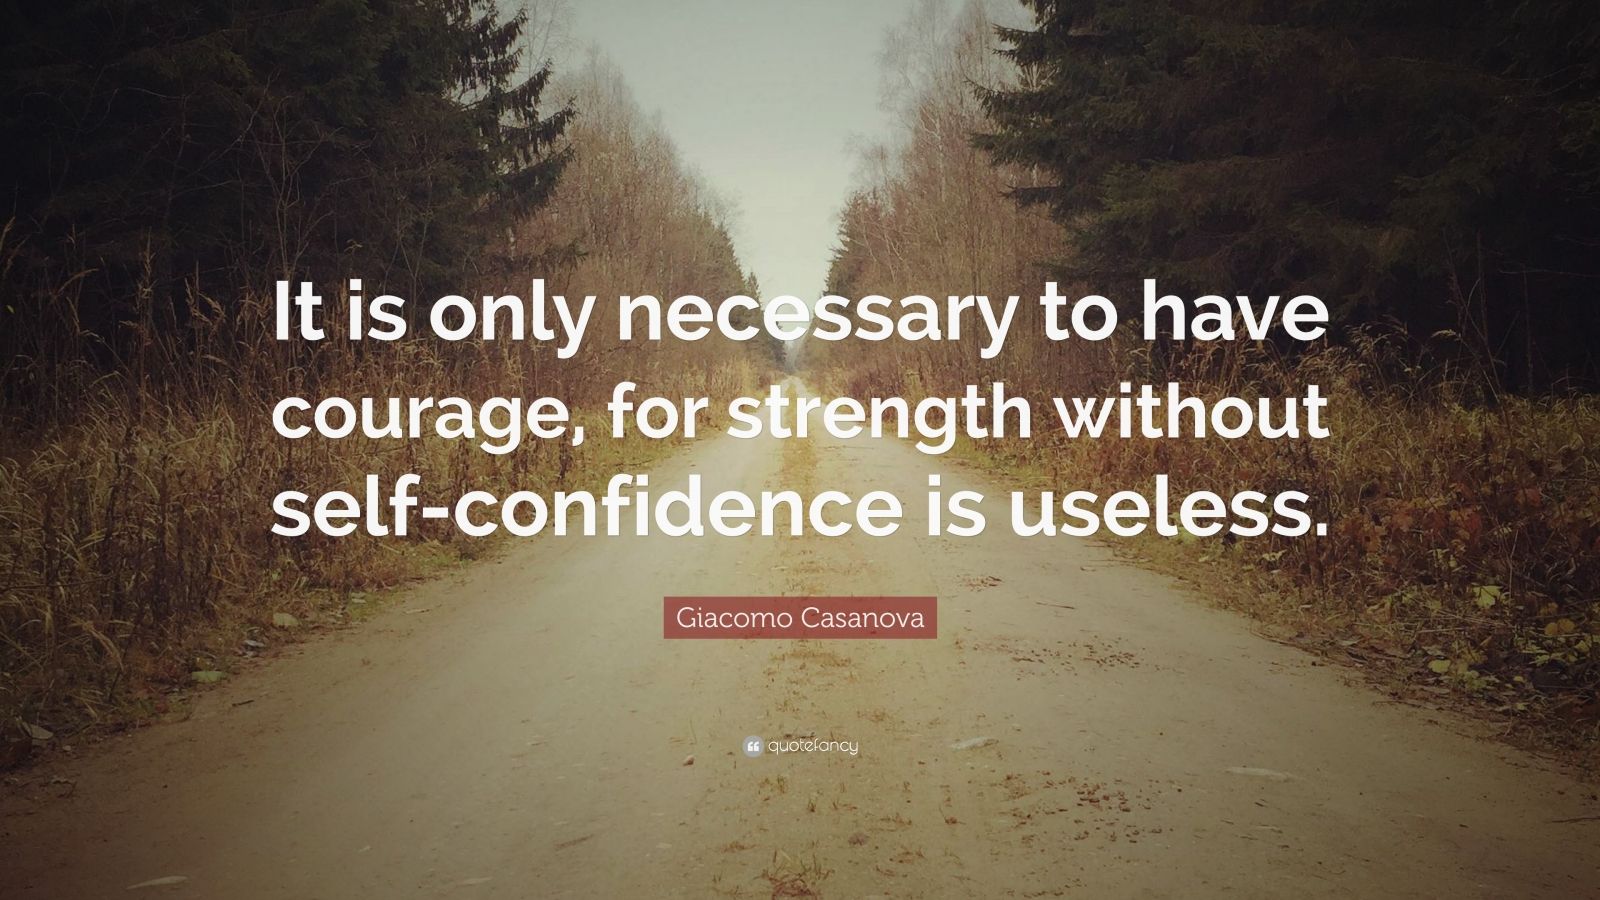 Giacomo Casanova Quote: “It is only necessary to have courage, for ...